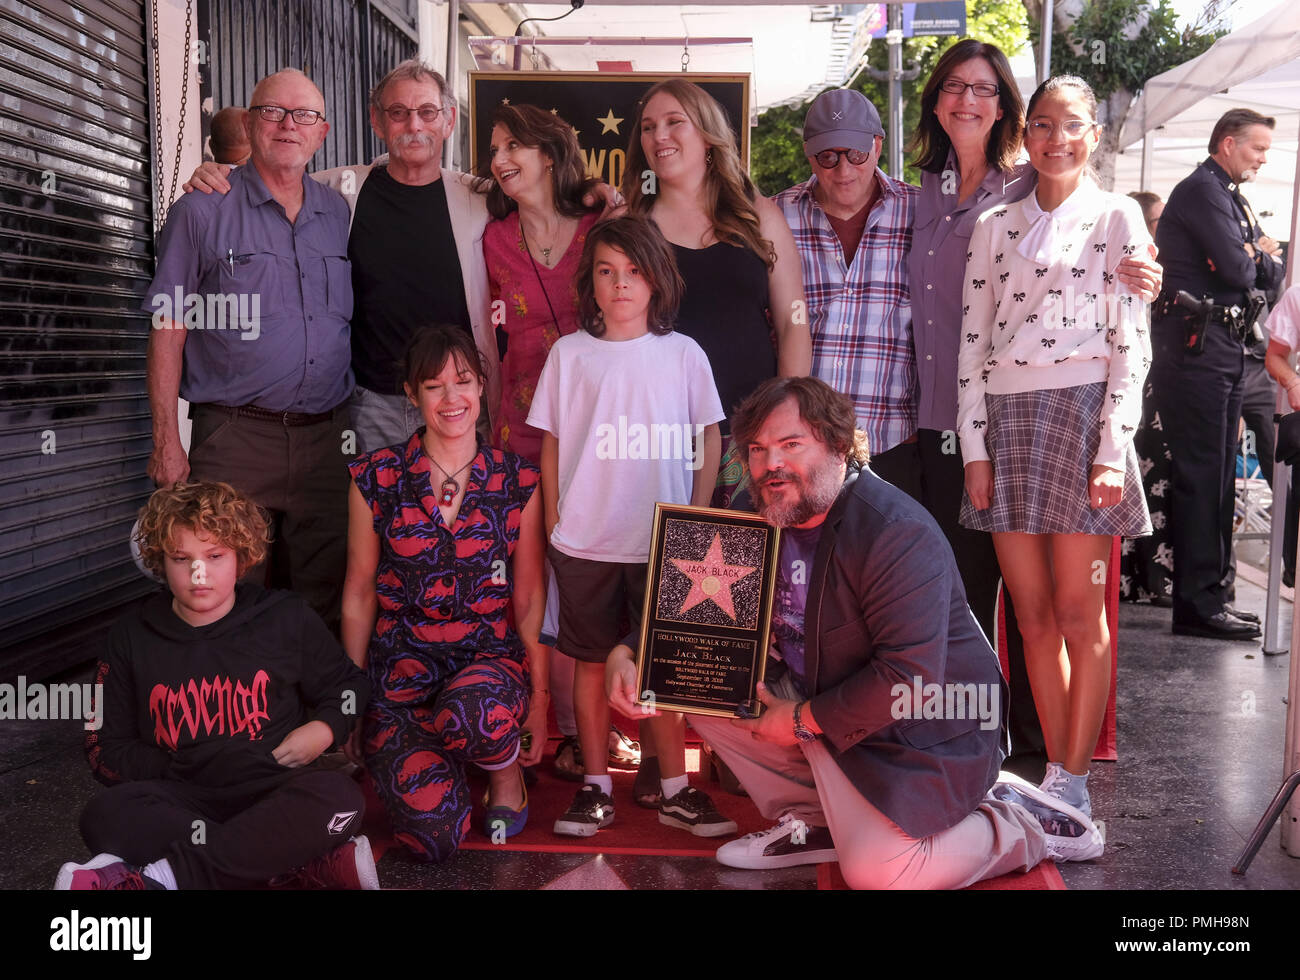 Los Angeles, California, USA. 18th Sep, 2018. Actor Jack Black poses with  his family during his star ceremony on the Hollywood Walk of Fame Star  where he was the recipient of the